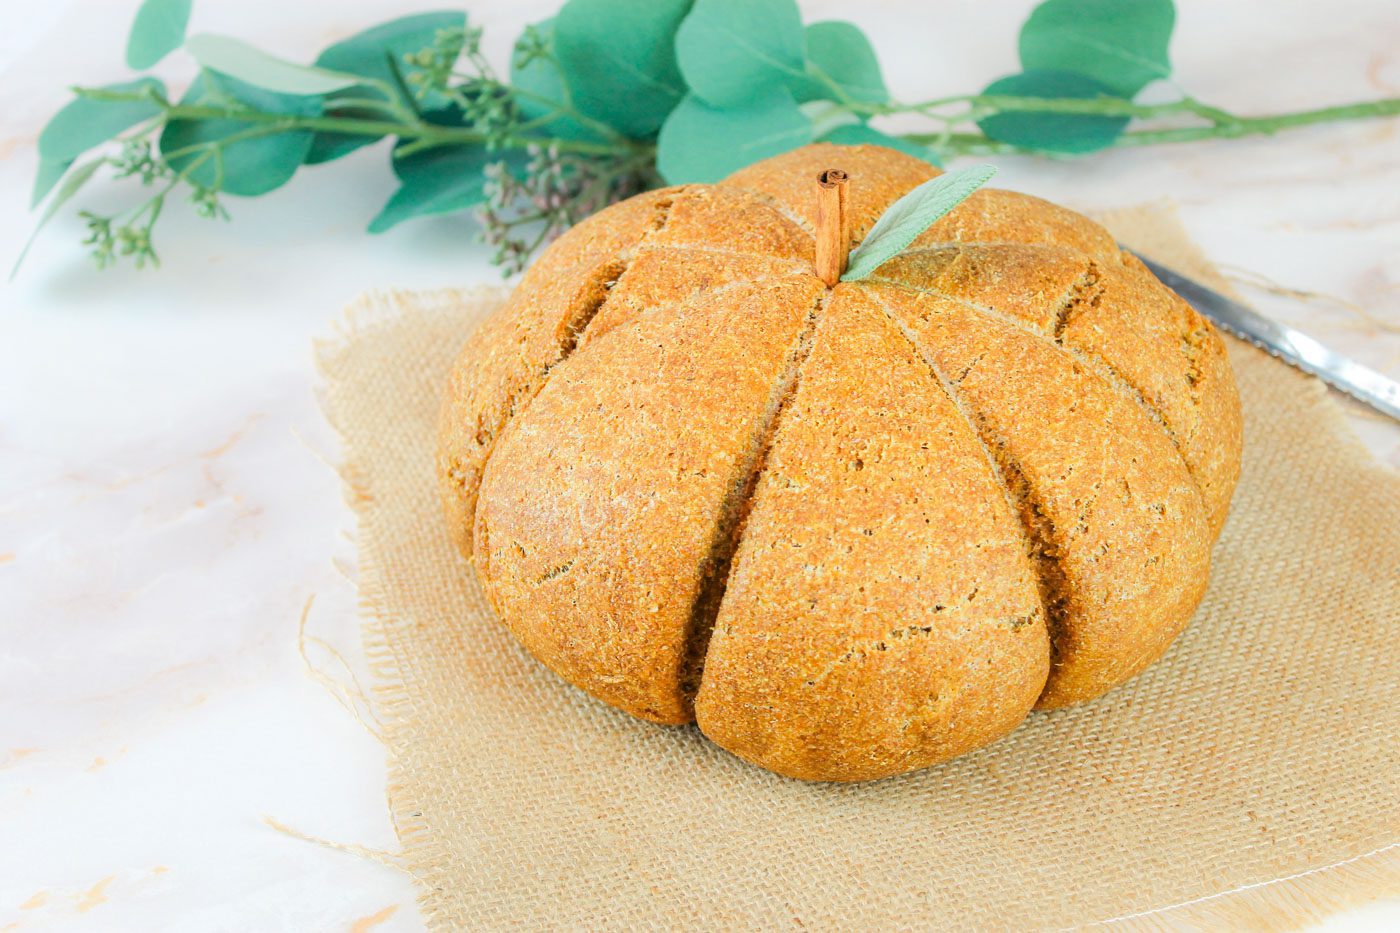 a loaf of bread shaped like a pumpkin sitting on a piece of burlap and a branch of greenery in the background